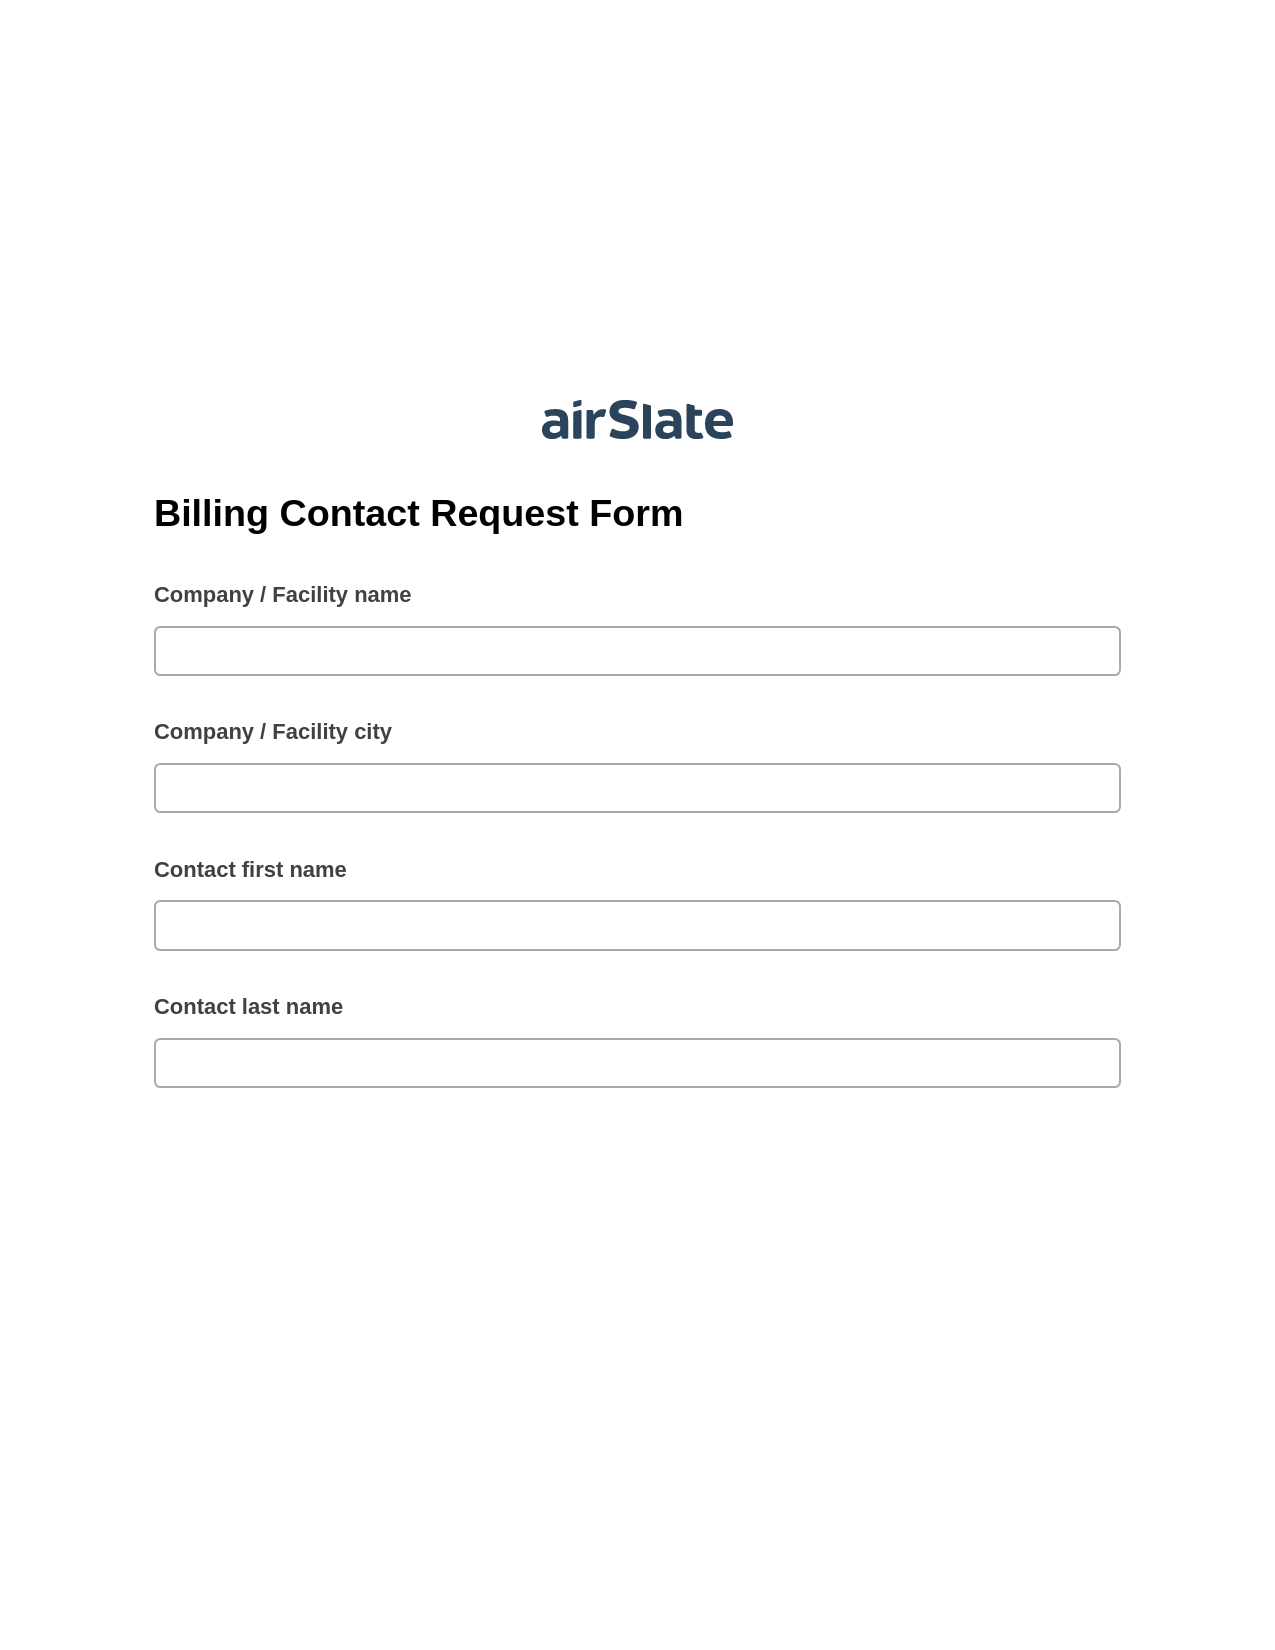 Multirole Billing Contact Request Form Pre-fill from Salesforce Record Bot, Document Hide Bot, Slack Two-Way Binding Bot